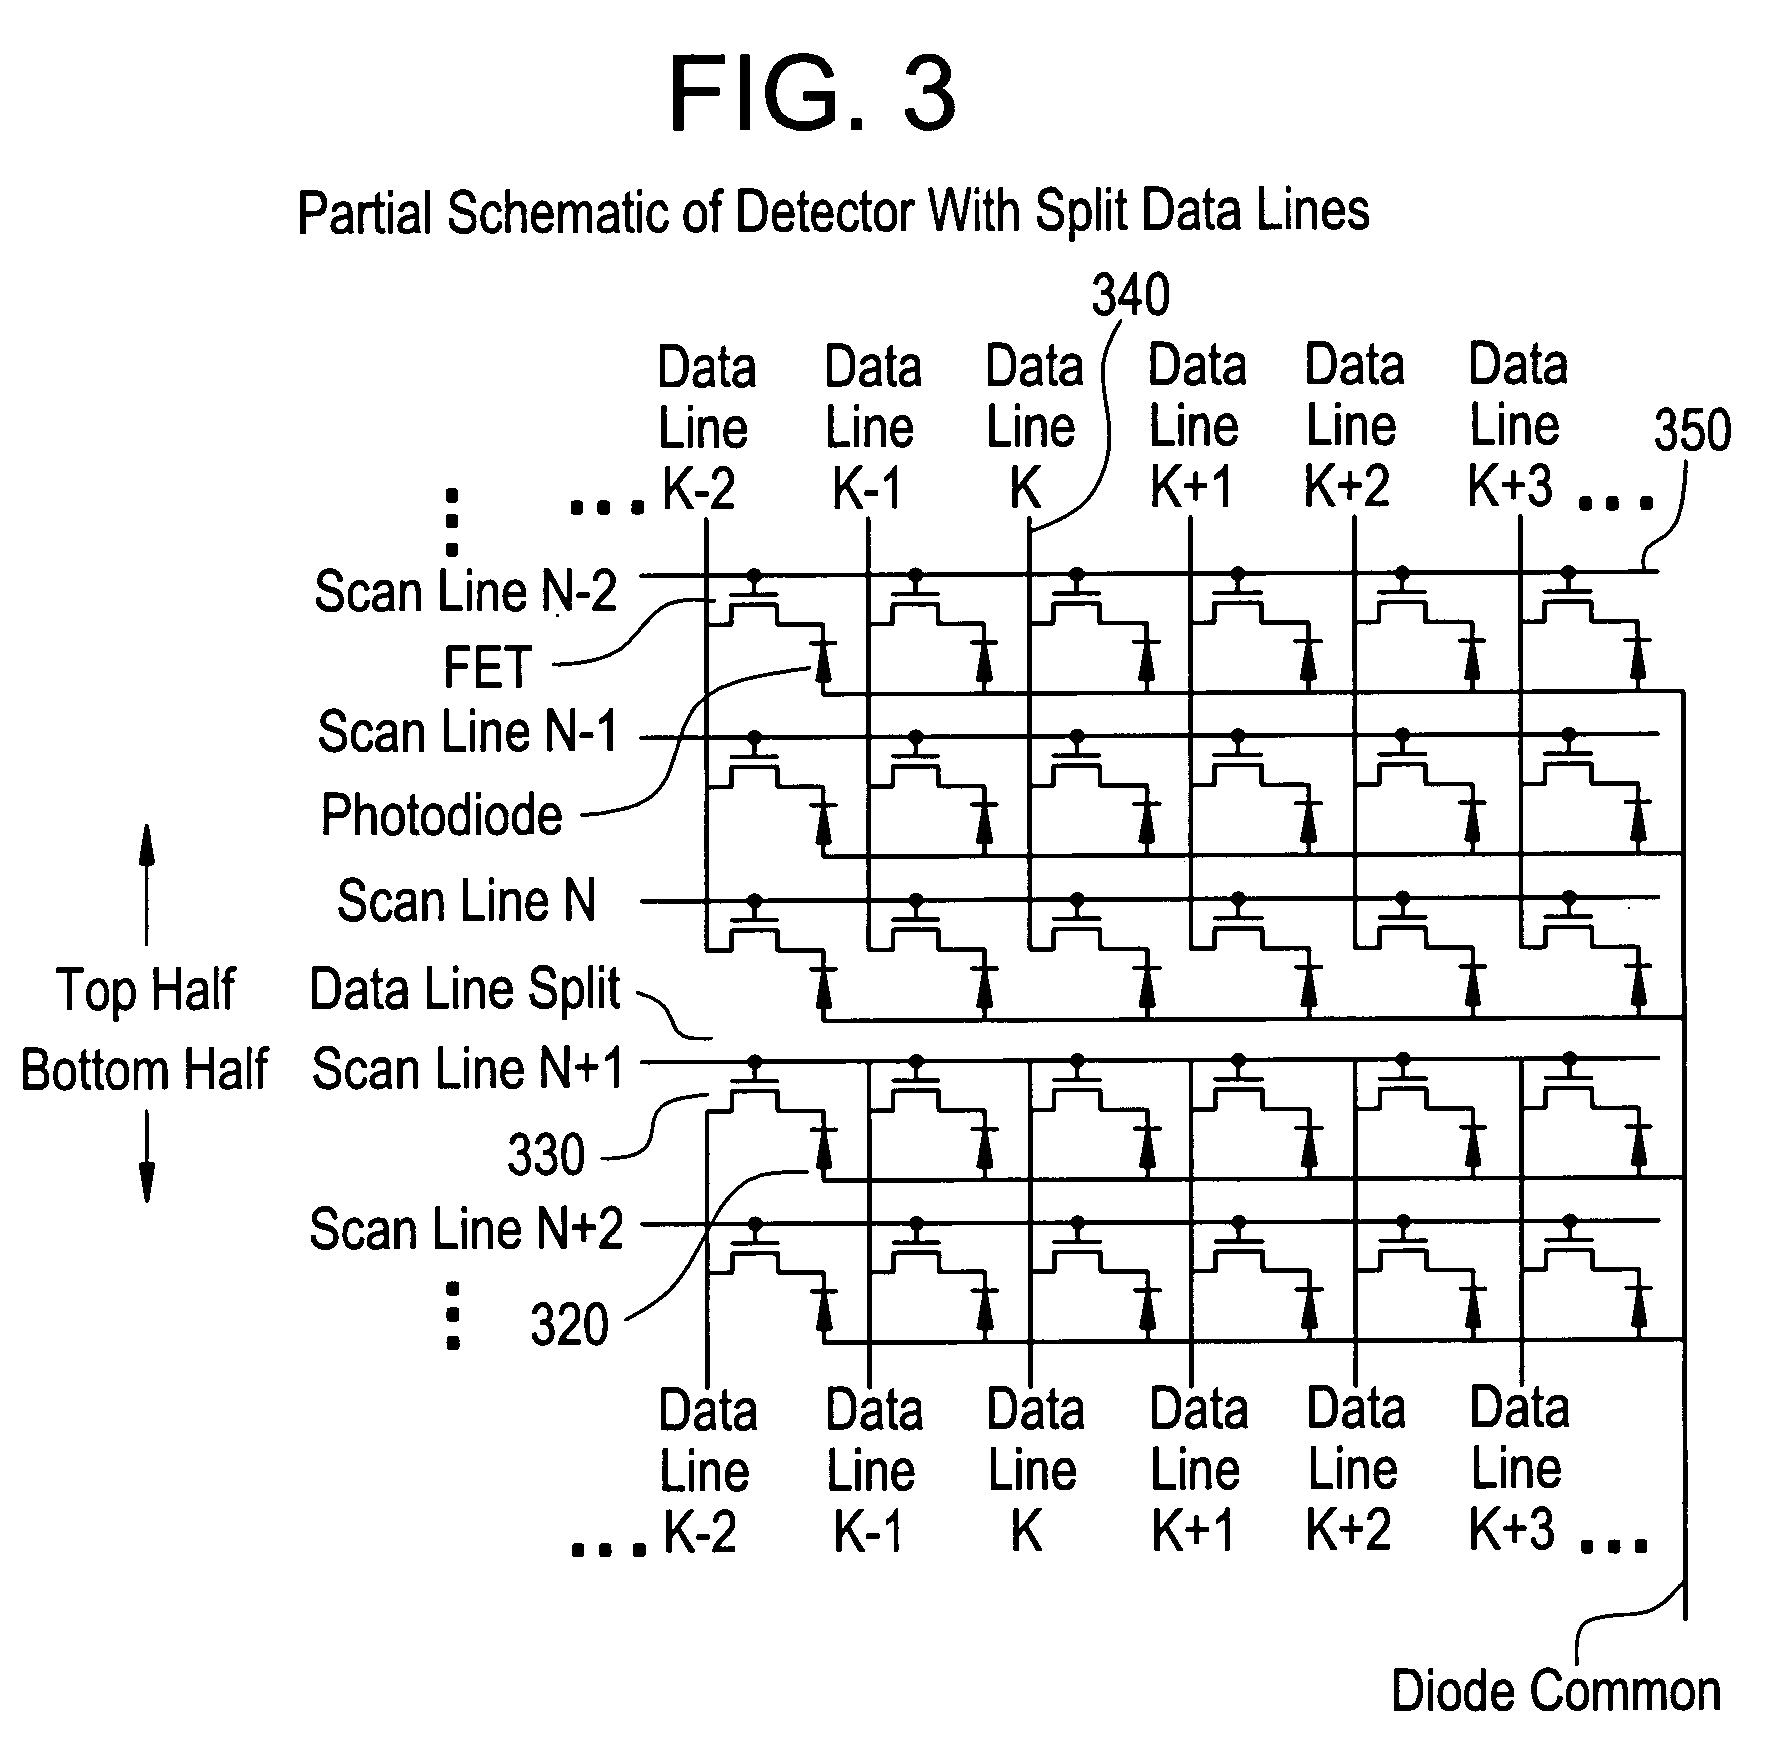 Method and apparatus for improved data acquisition using a solid state digital X-ray detector